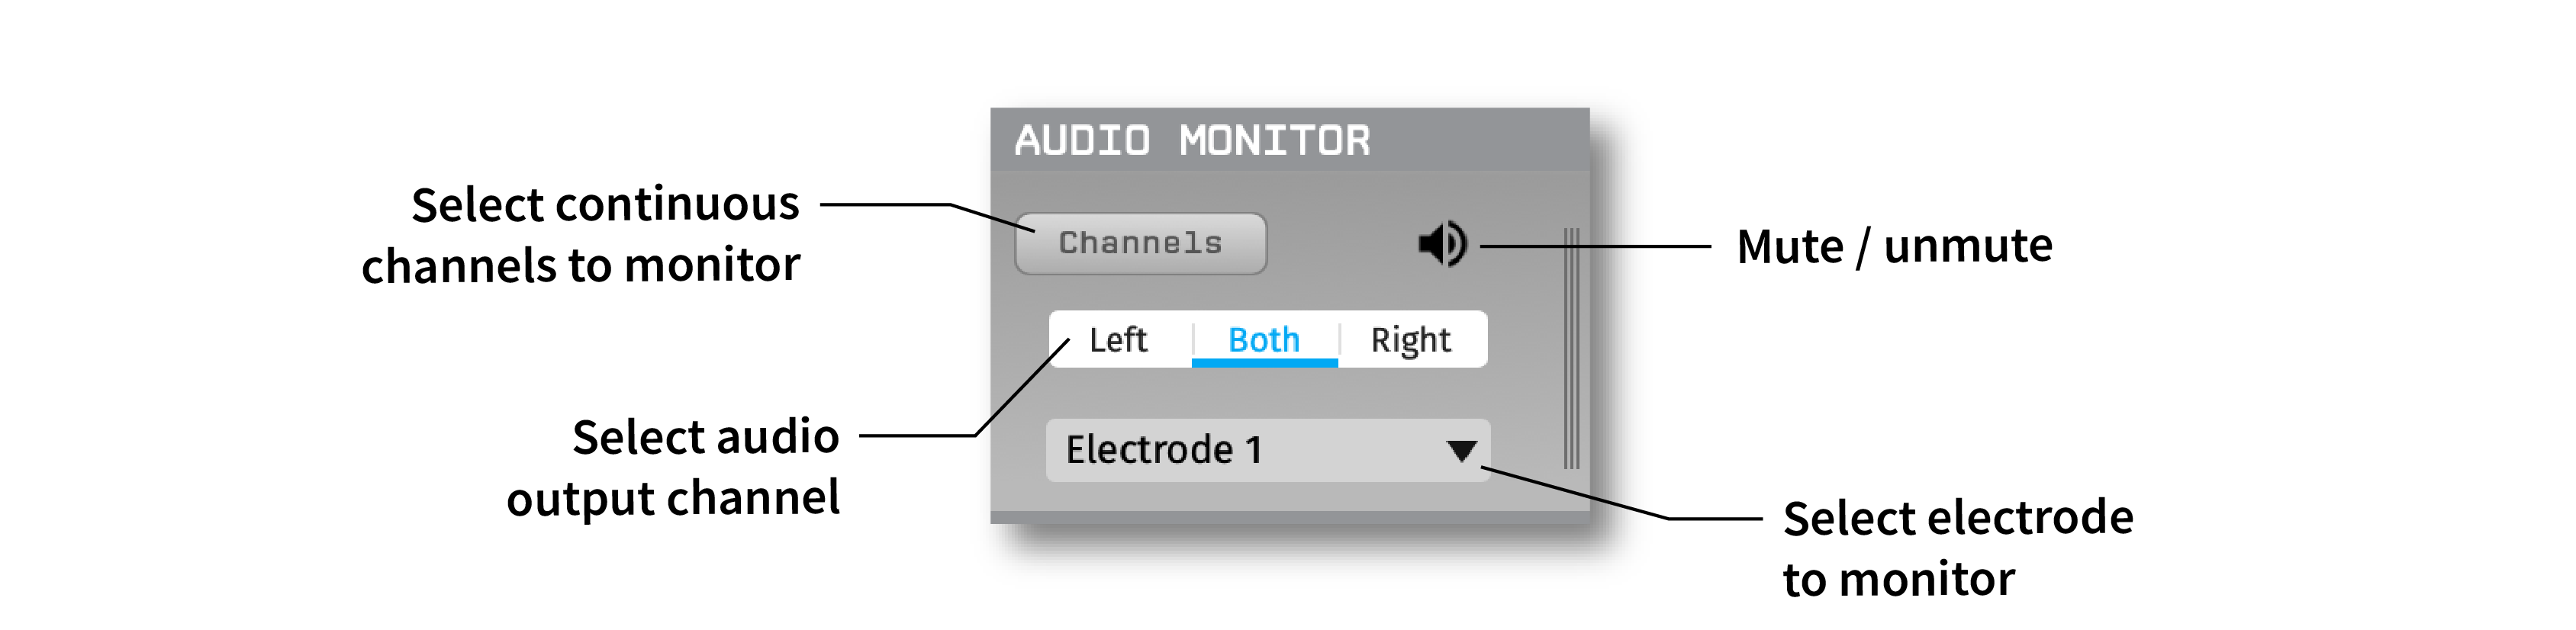 Annotated Audio Monitor settings interface